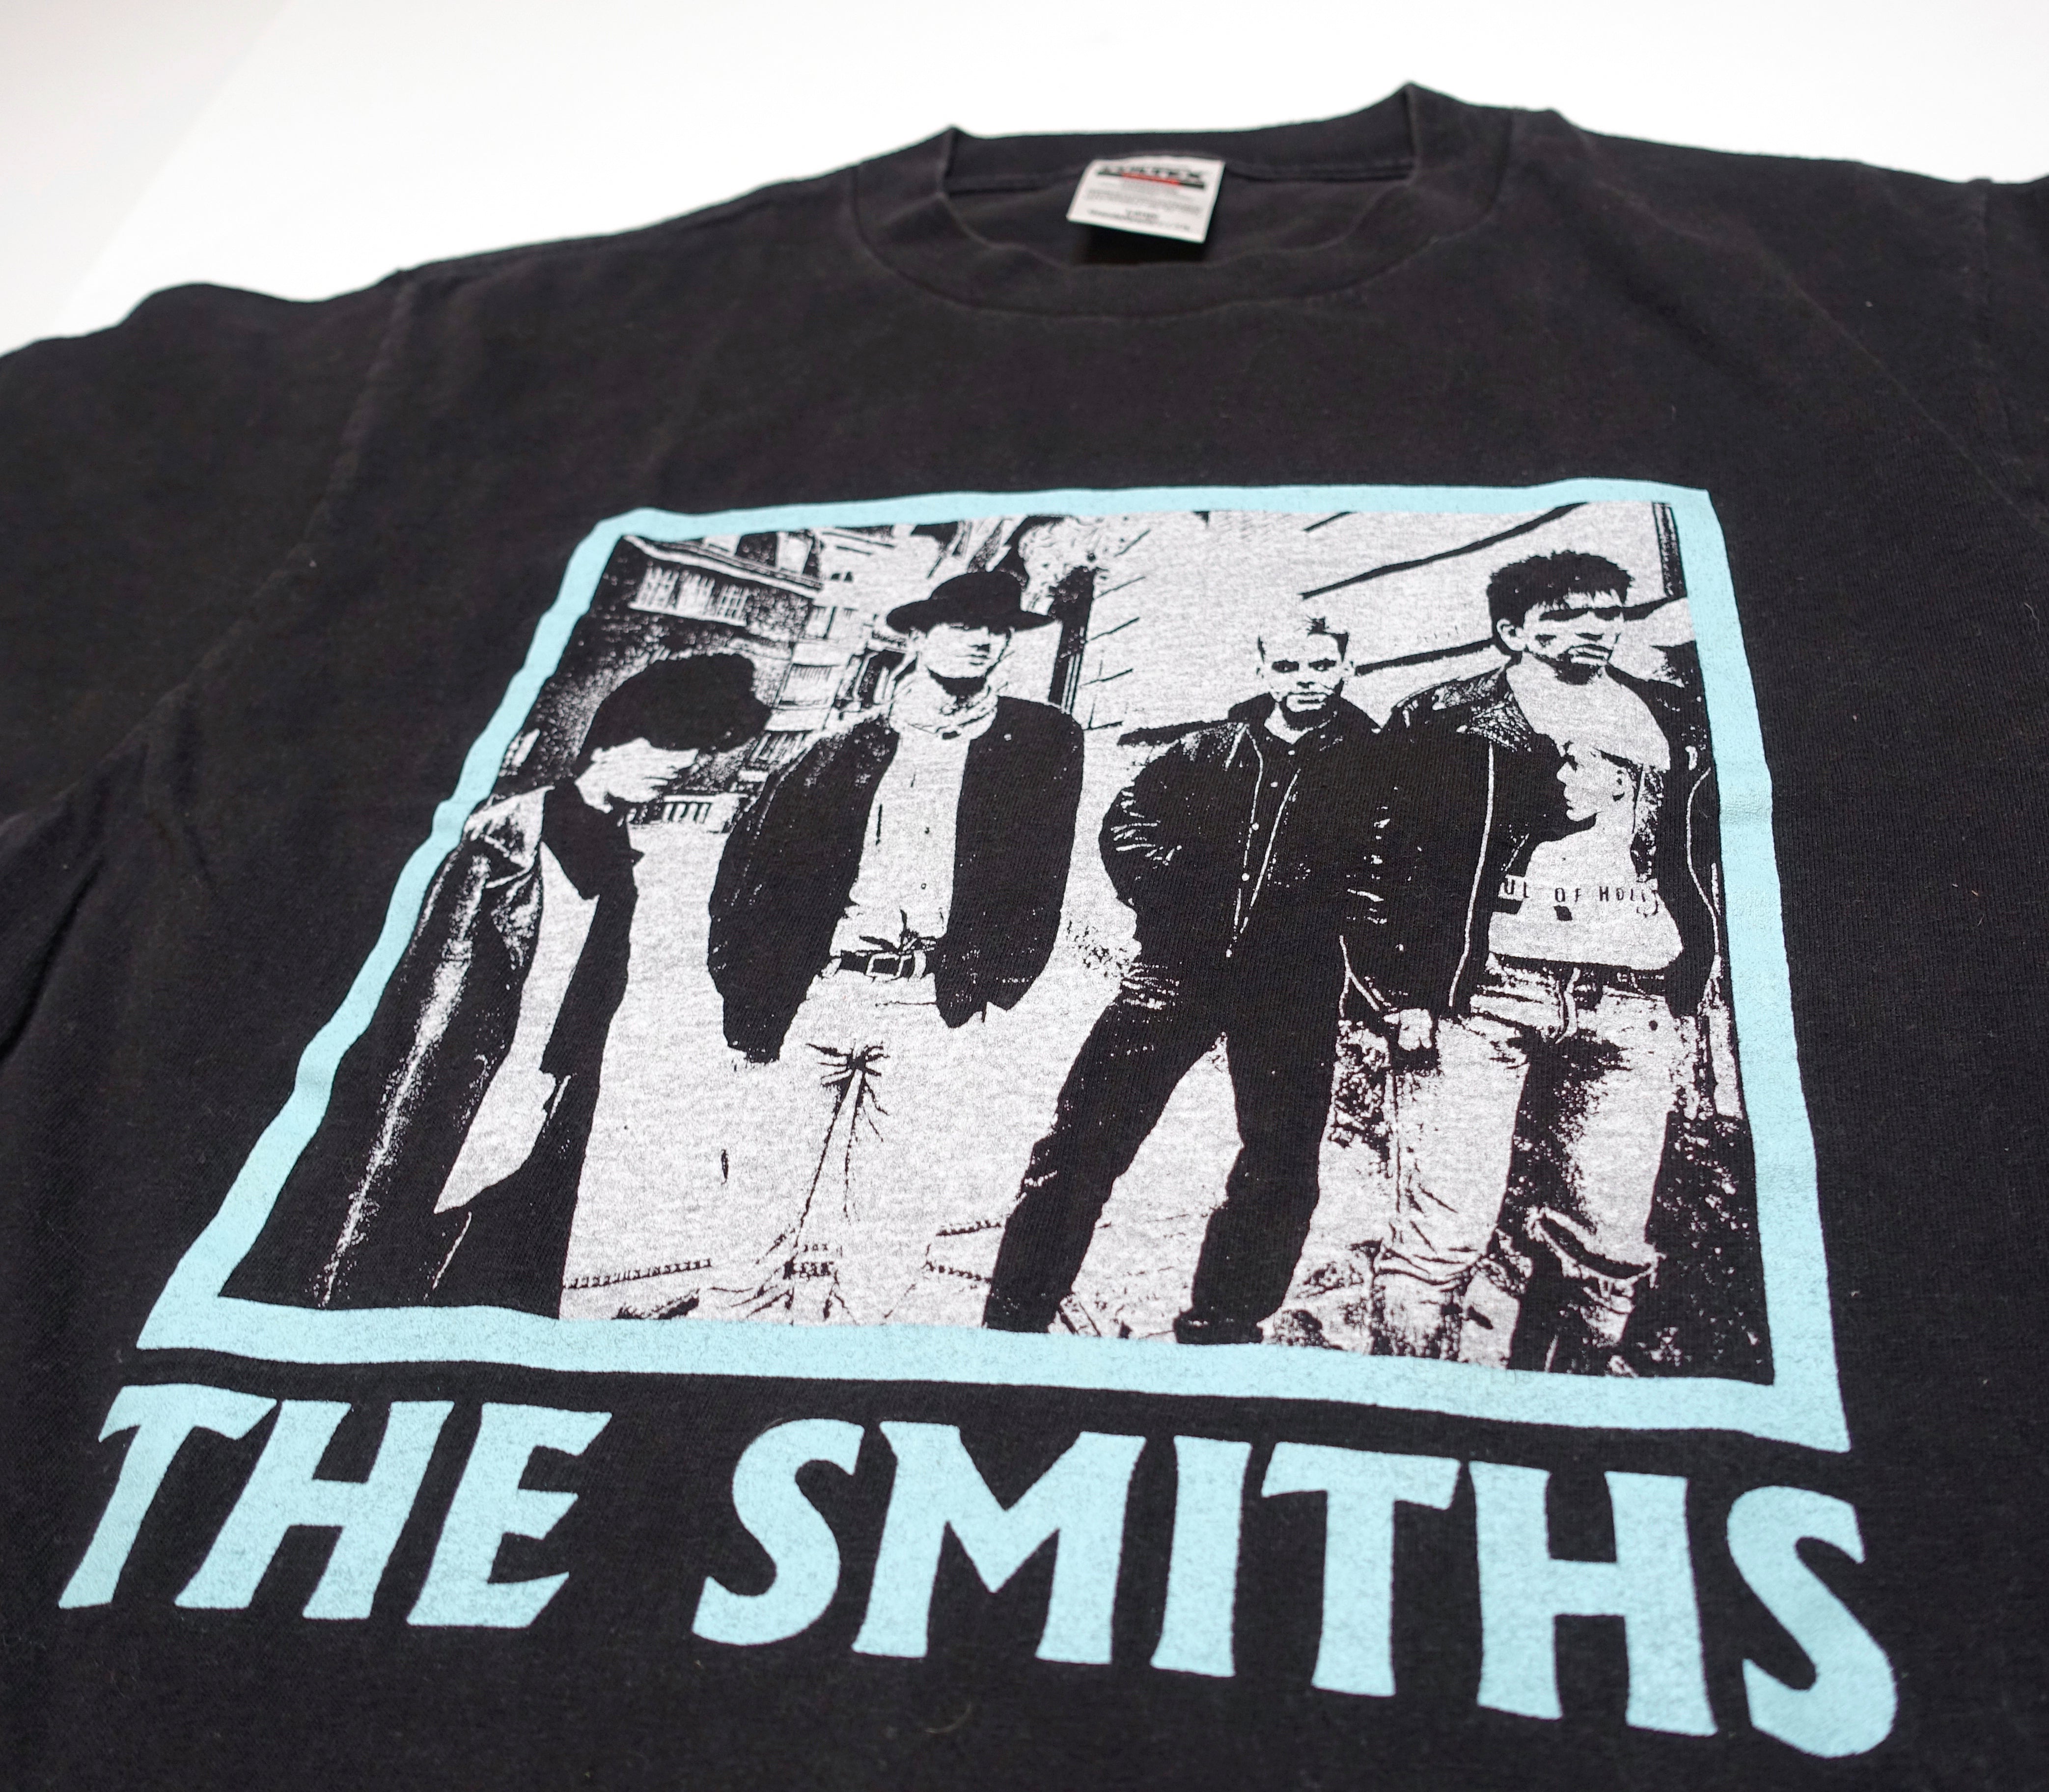 the Smiths - Band Portrait / Meat Is Murder  90's Bootleg Shirt Size Large